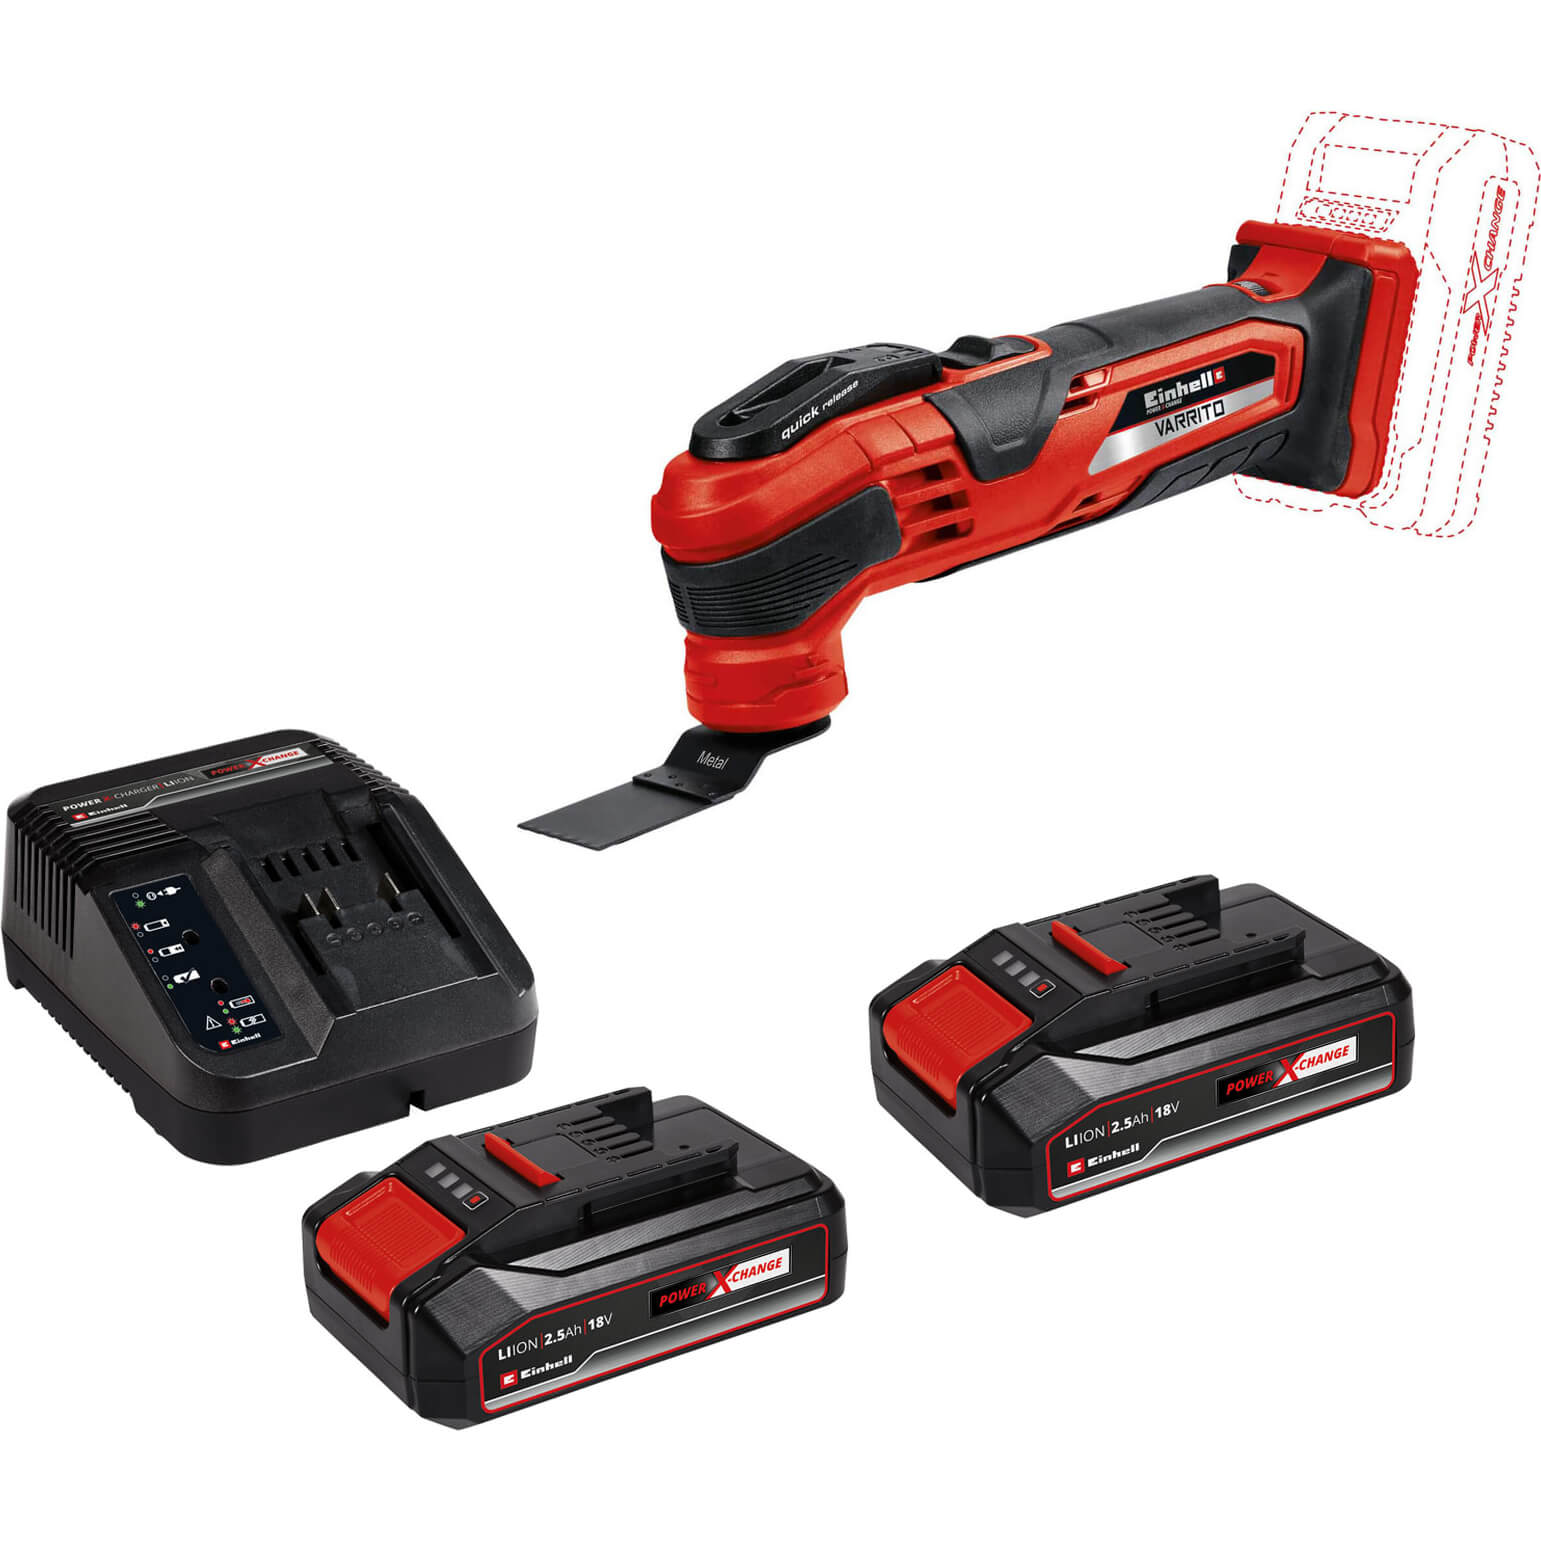 Image of Einhell VARRITO 18v Cordless Oscillating Multi Tool 2 x 2.5ah Li-ion Charger No Case